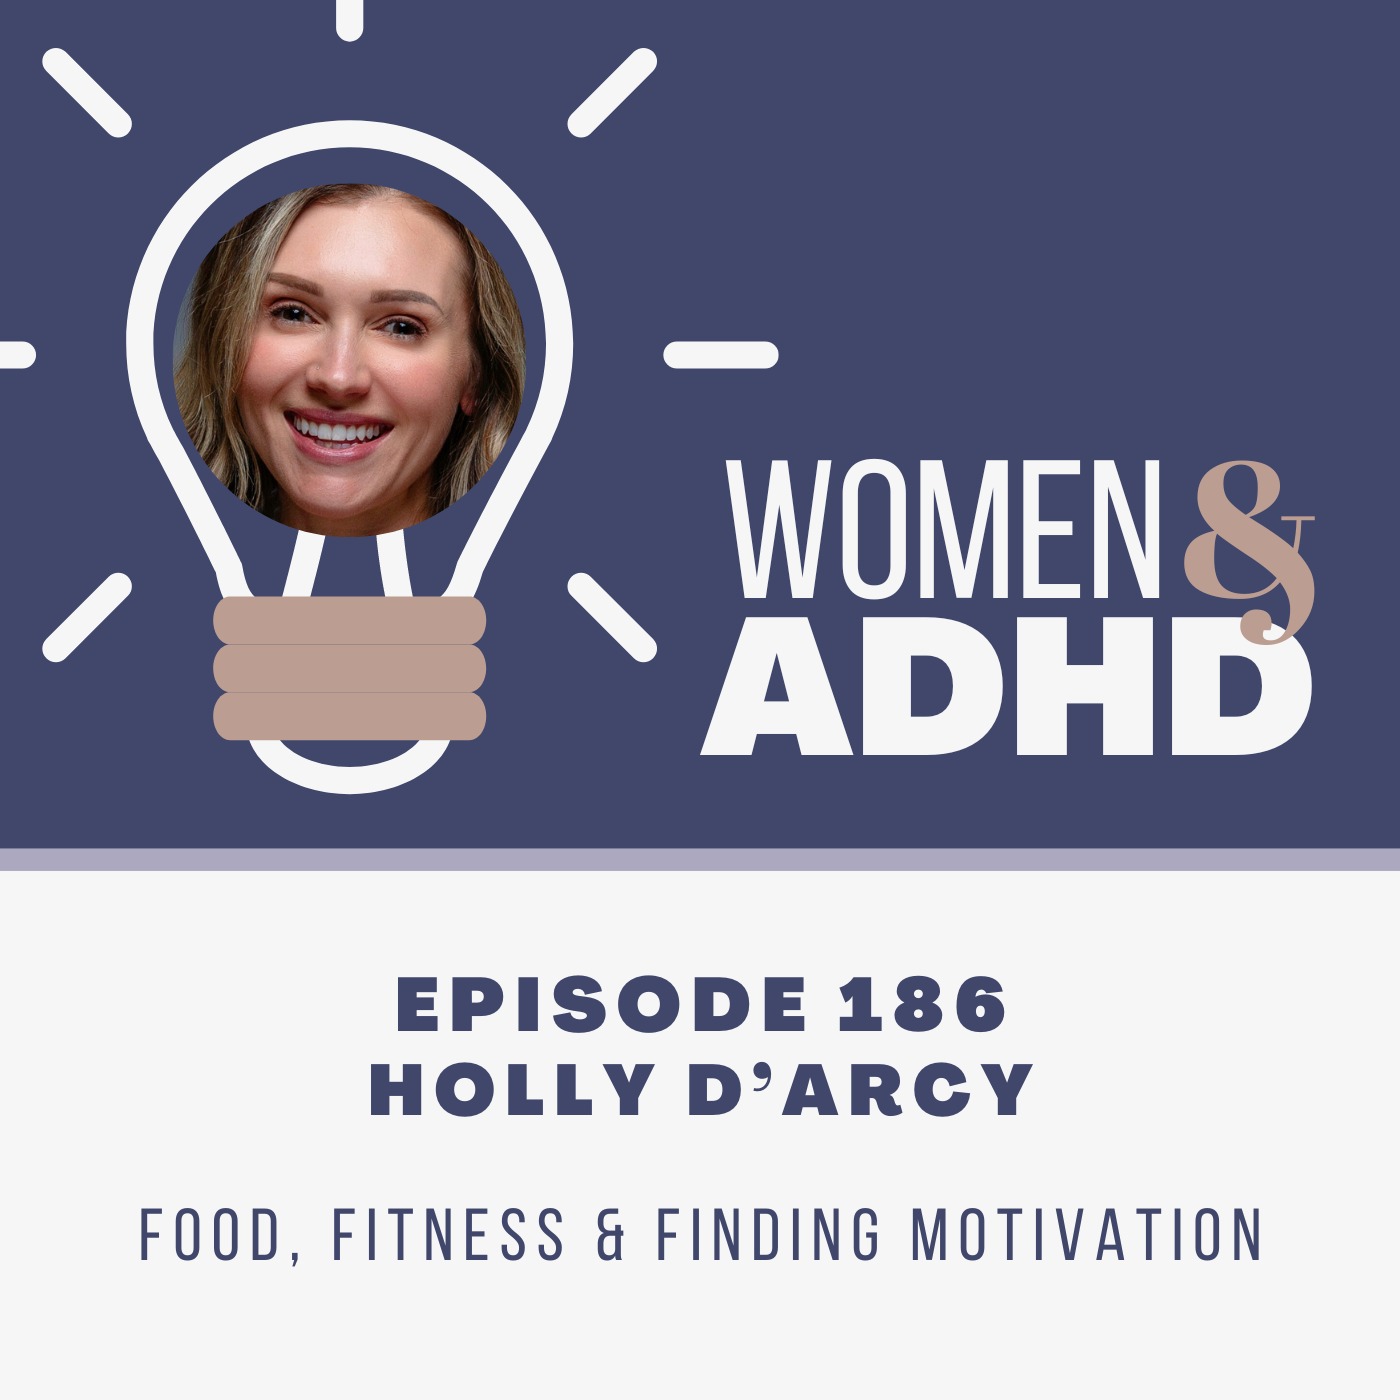 Holly D’Arcy: Food, fitness & finding motivation